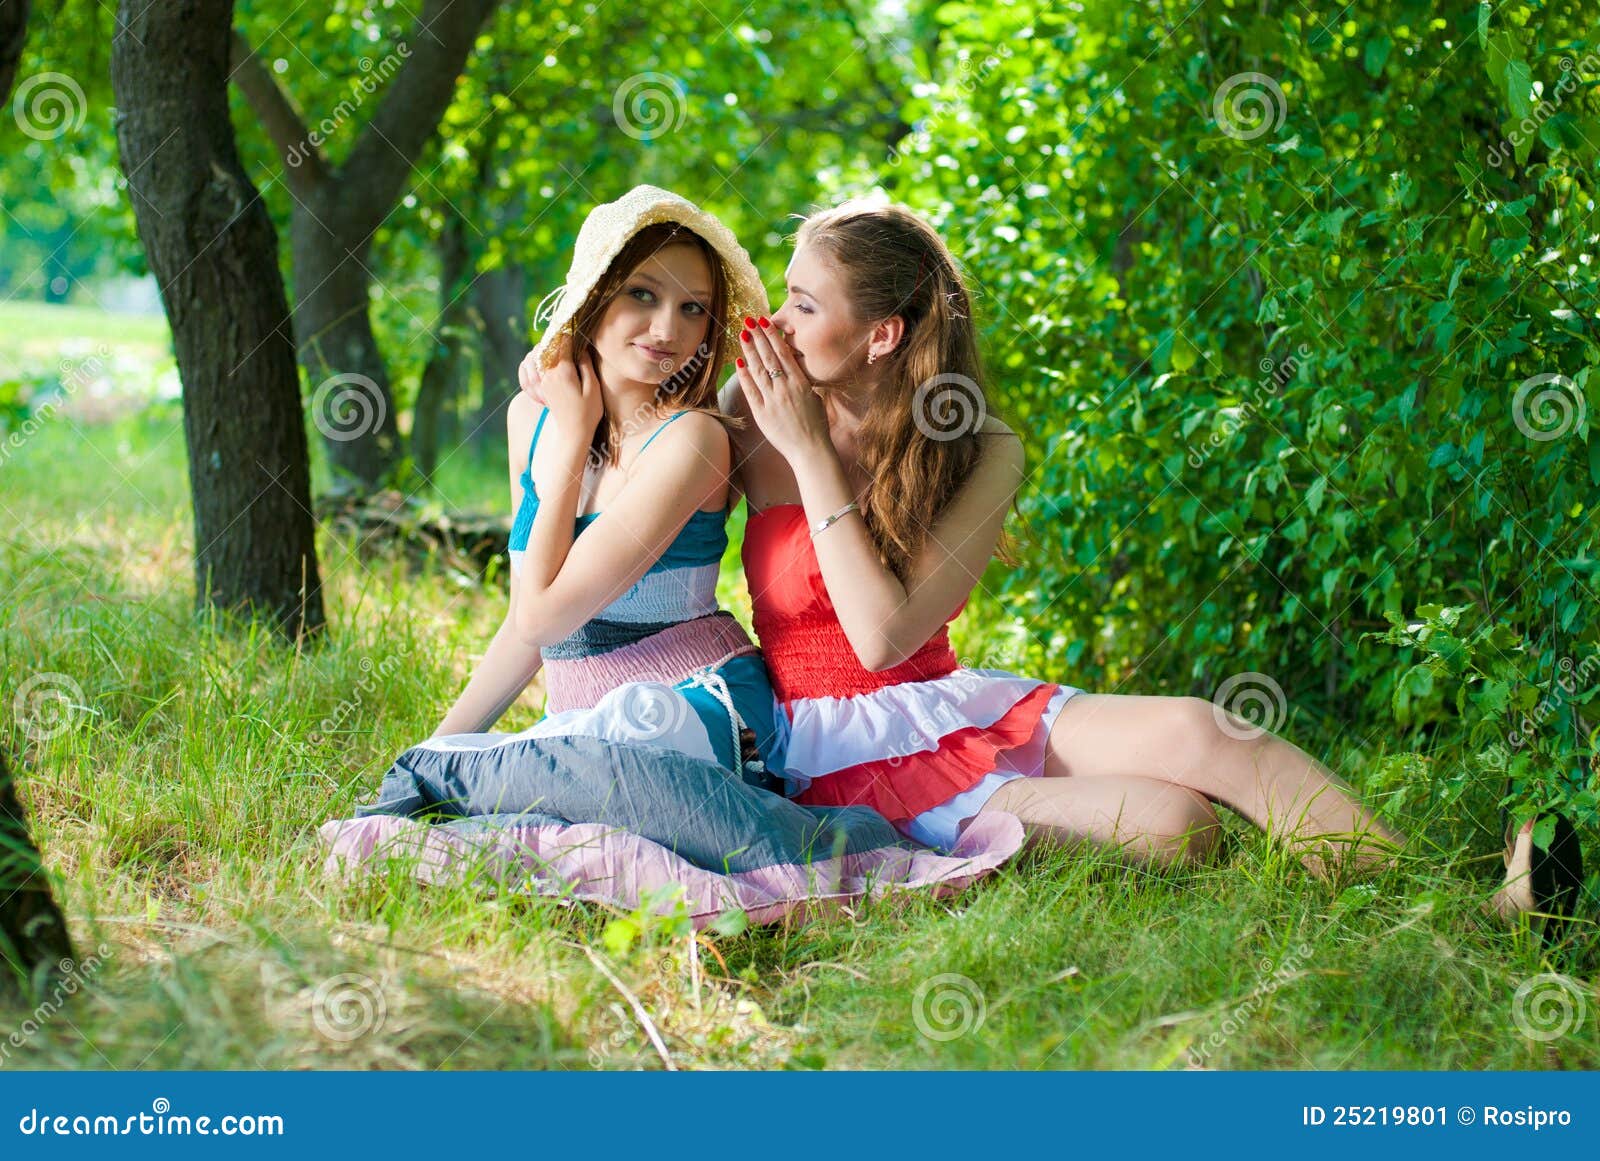 Two Beautiful Happy Smiling Young Women Talking Stock Image - Image